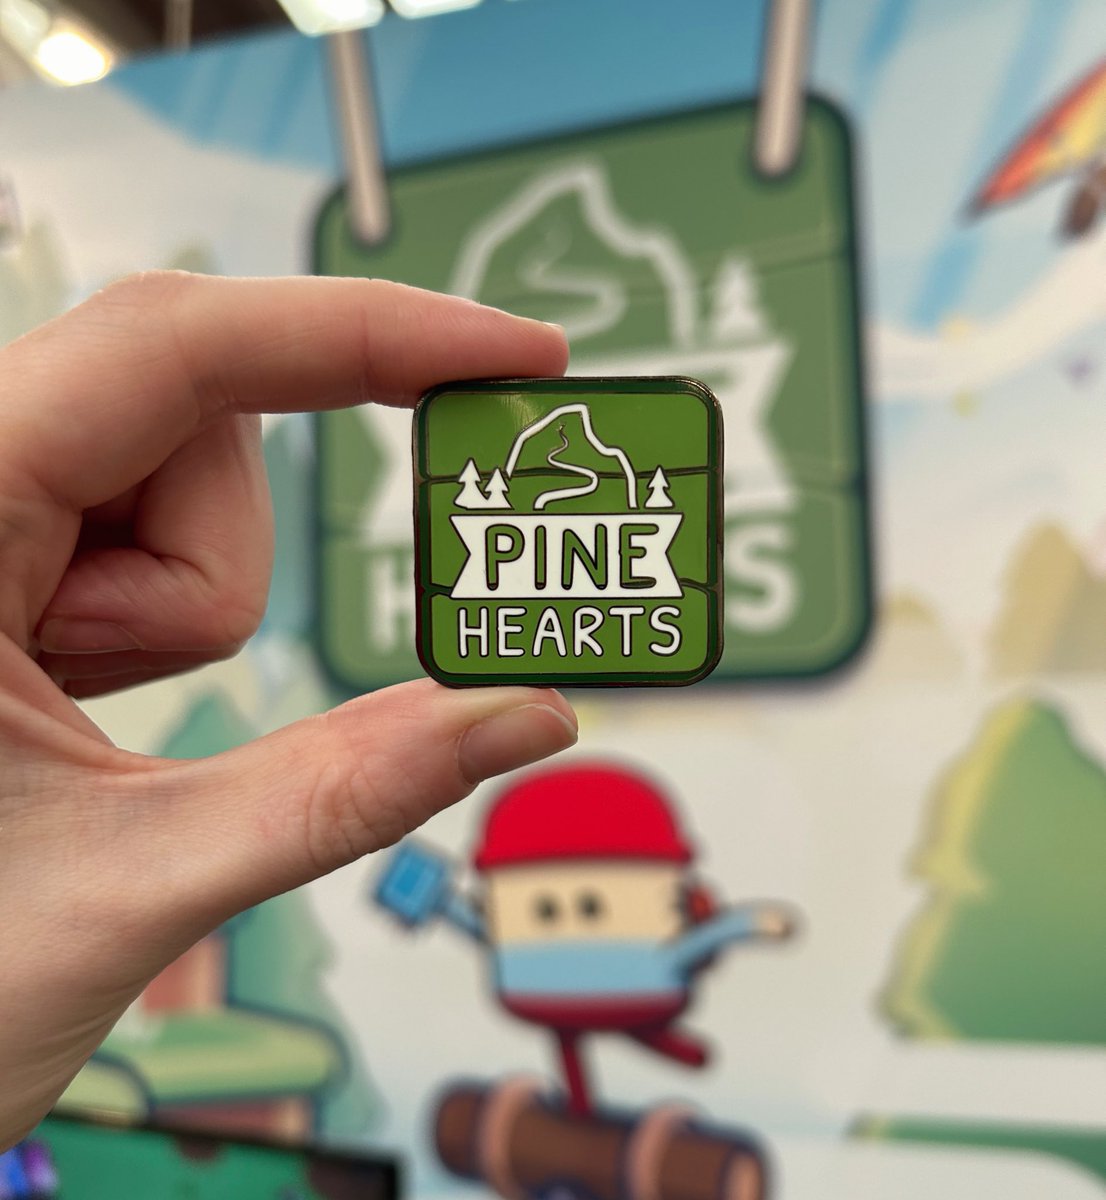 It’s time for our final @WASDlive_ giveaway!! 🎉✨ If you’d like to win a set of our Pine Hearts pin badges RETWEET this post and give us a FOLLOW!! Giveaway is open to anyone living in the UK. Good luck! 🏕️💚